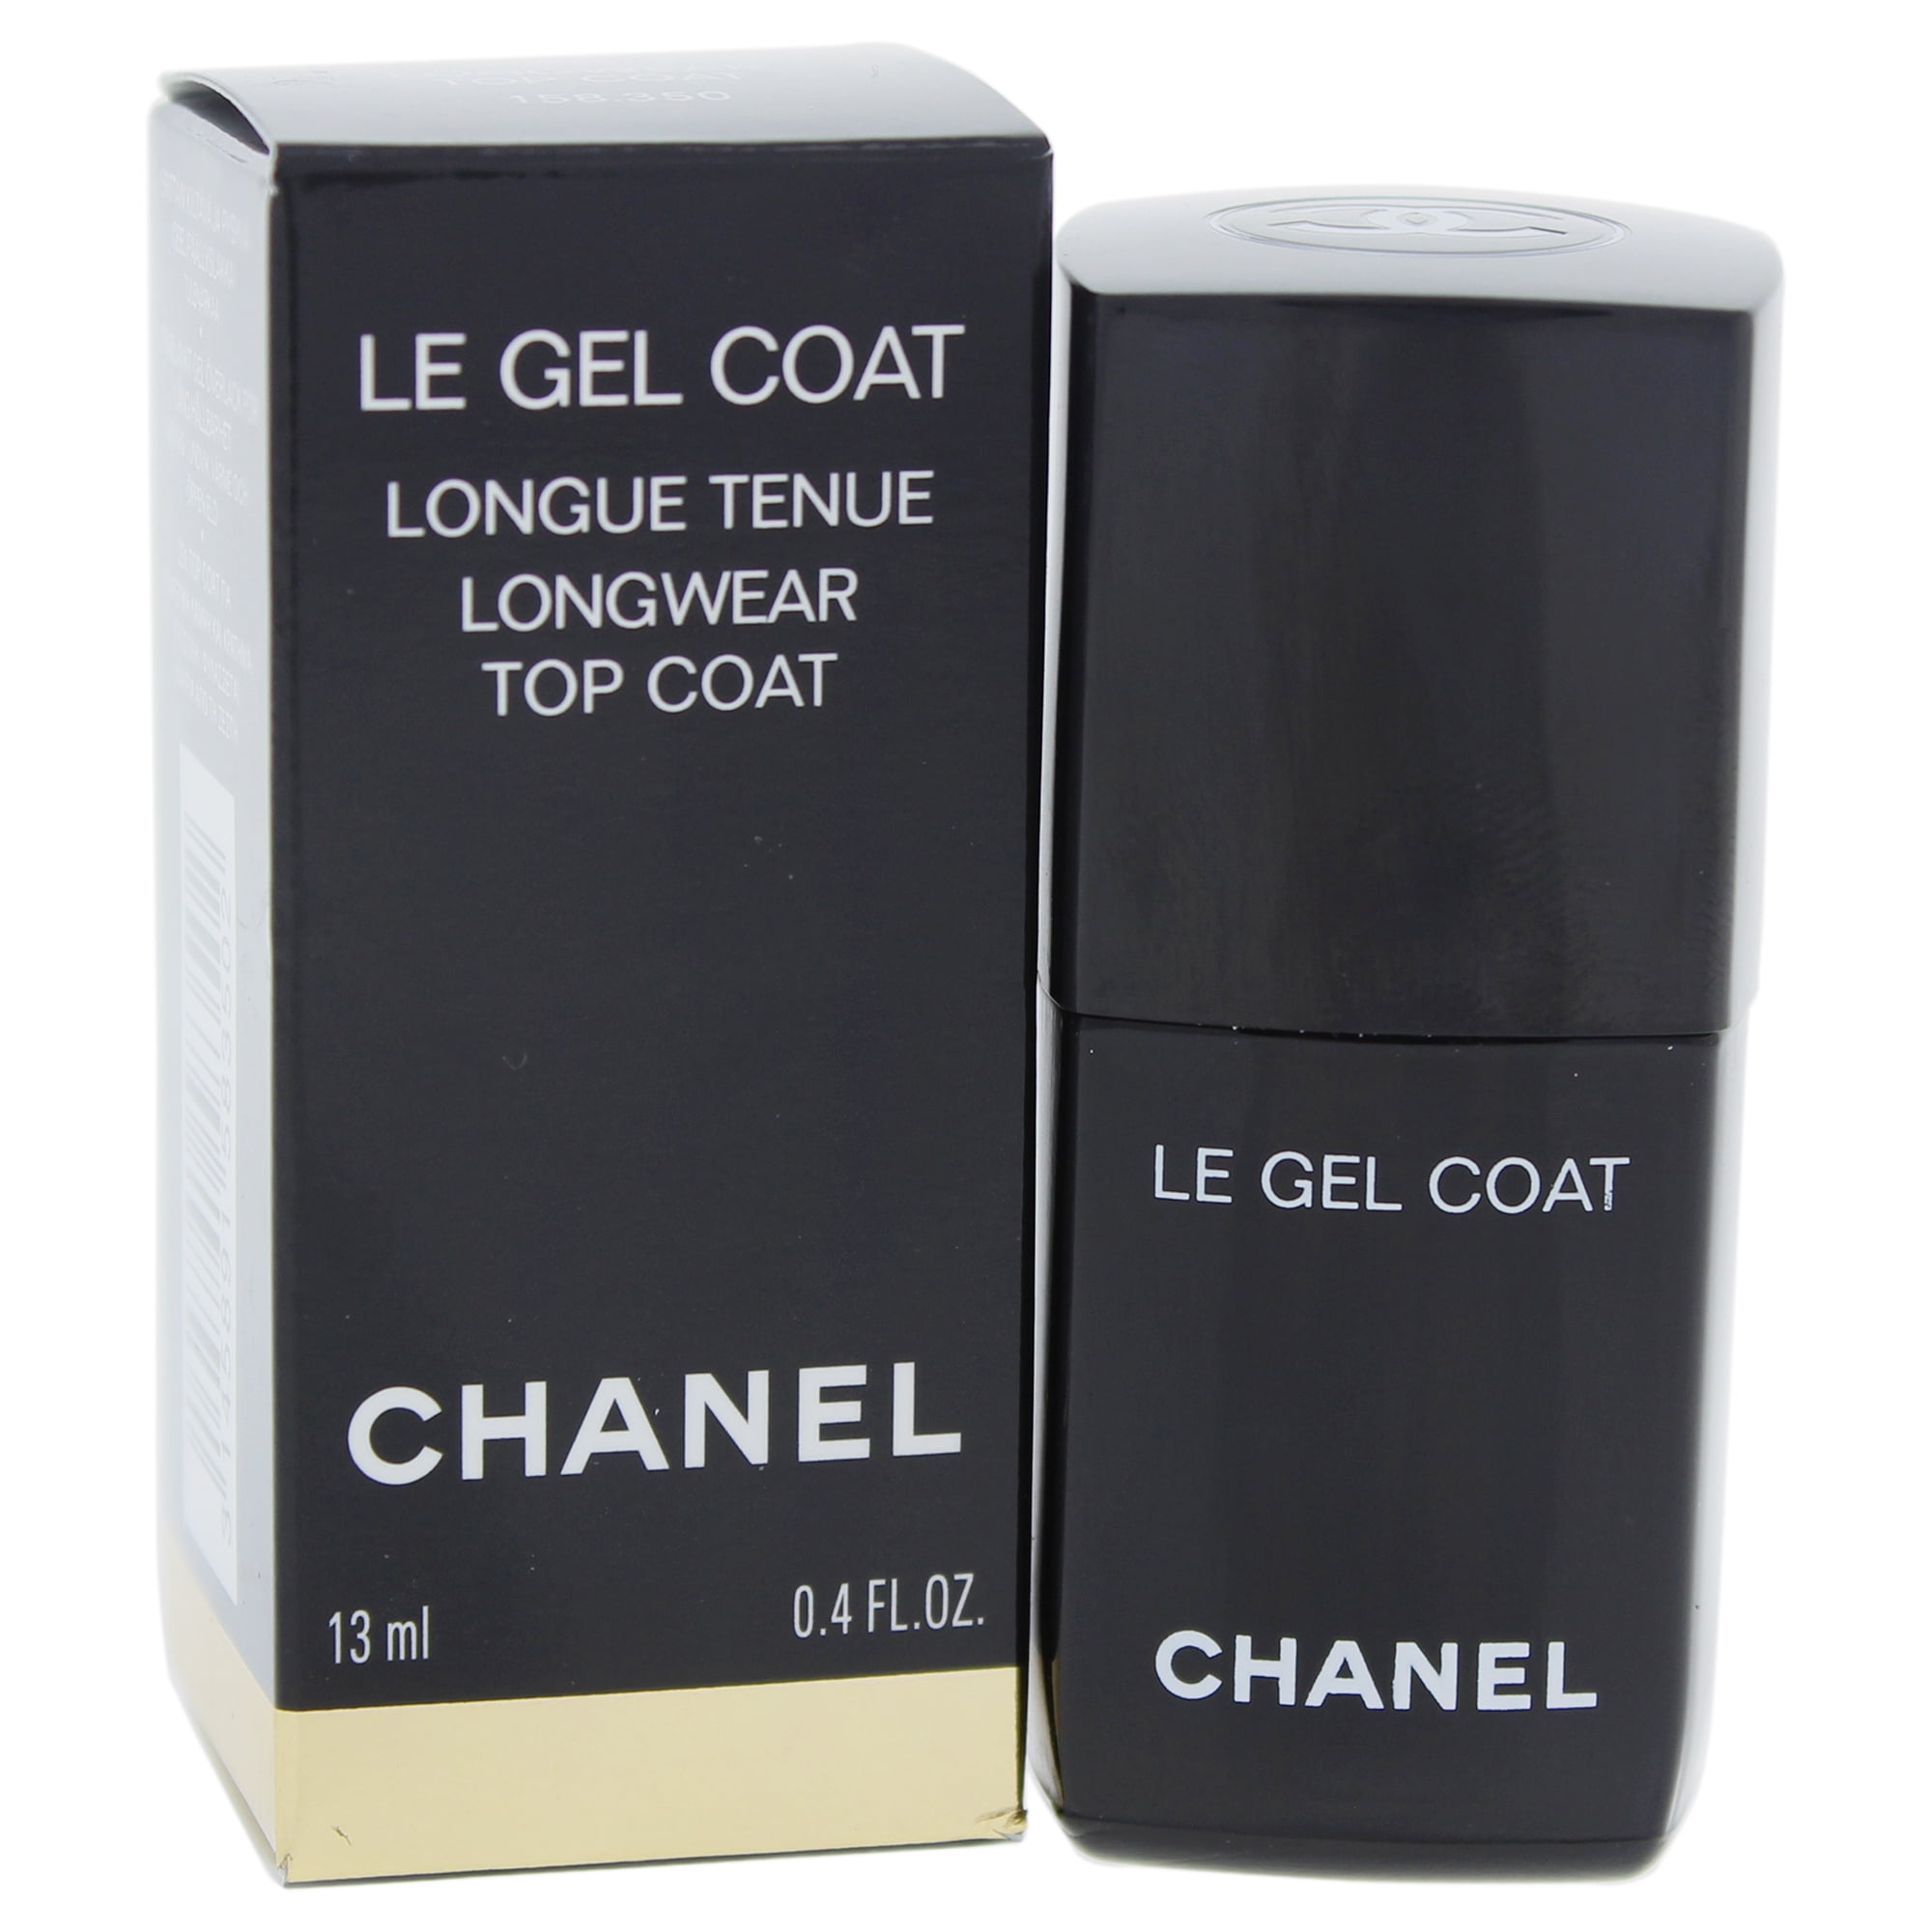 Le Gel Coat by Chanel for Women - 0.4 oz Nail Polish 